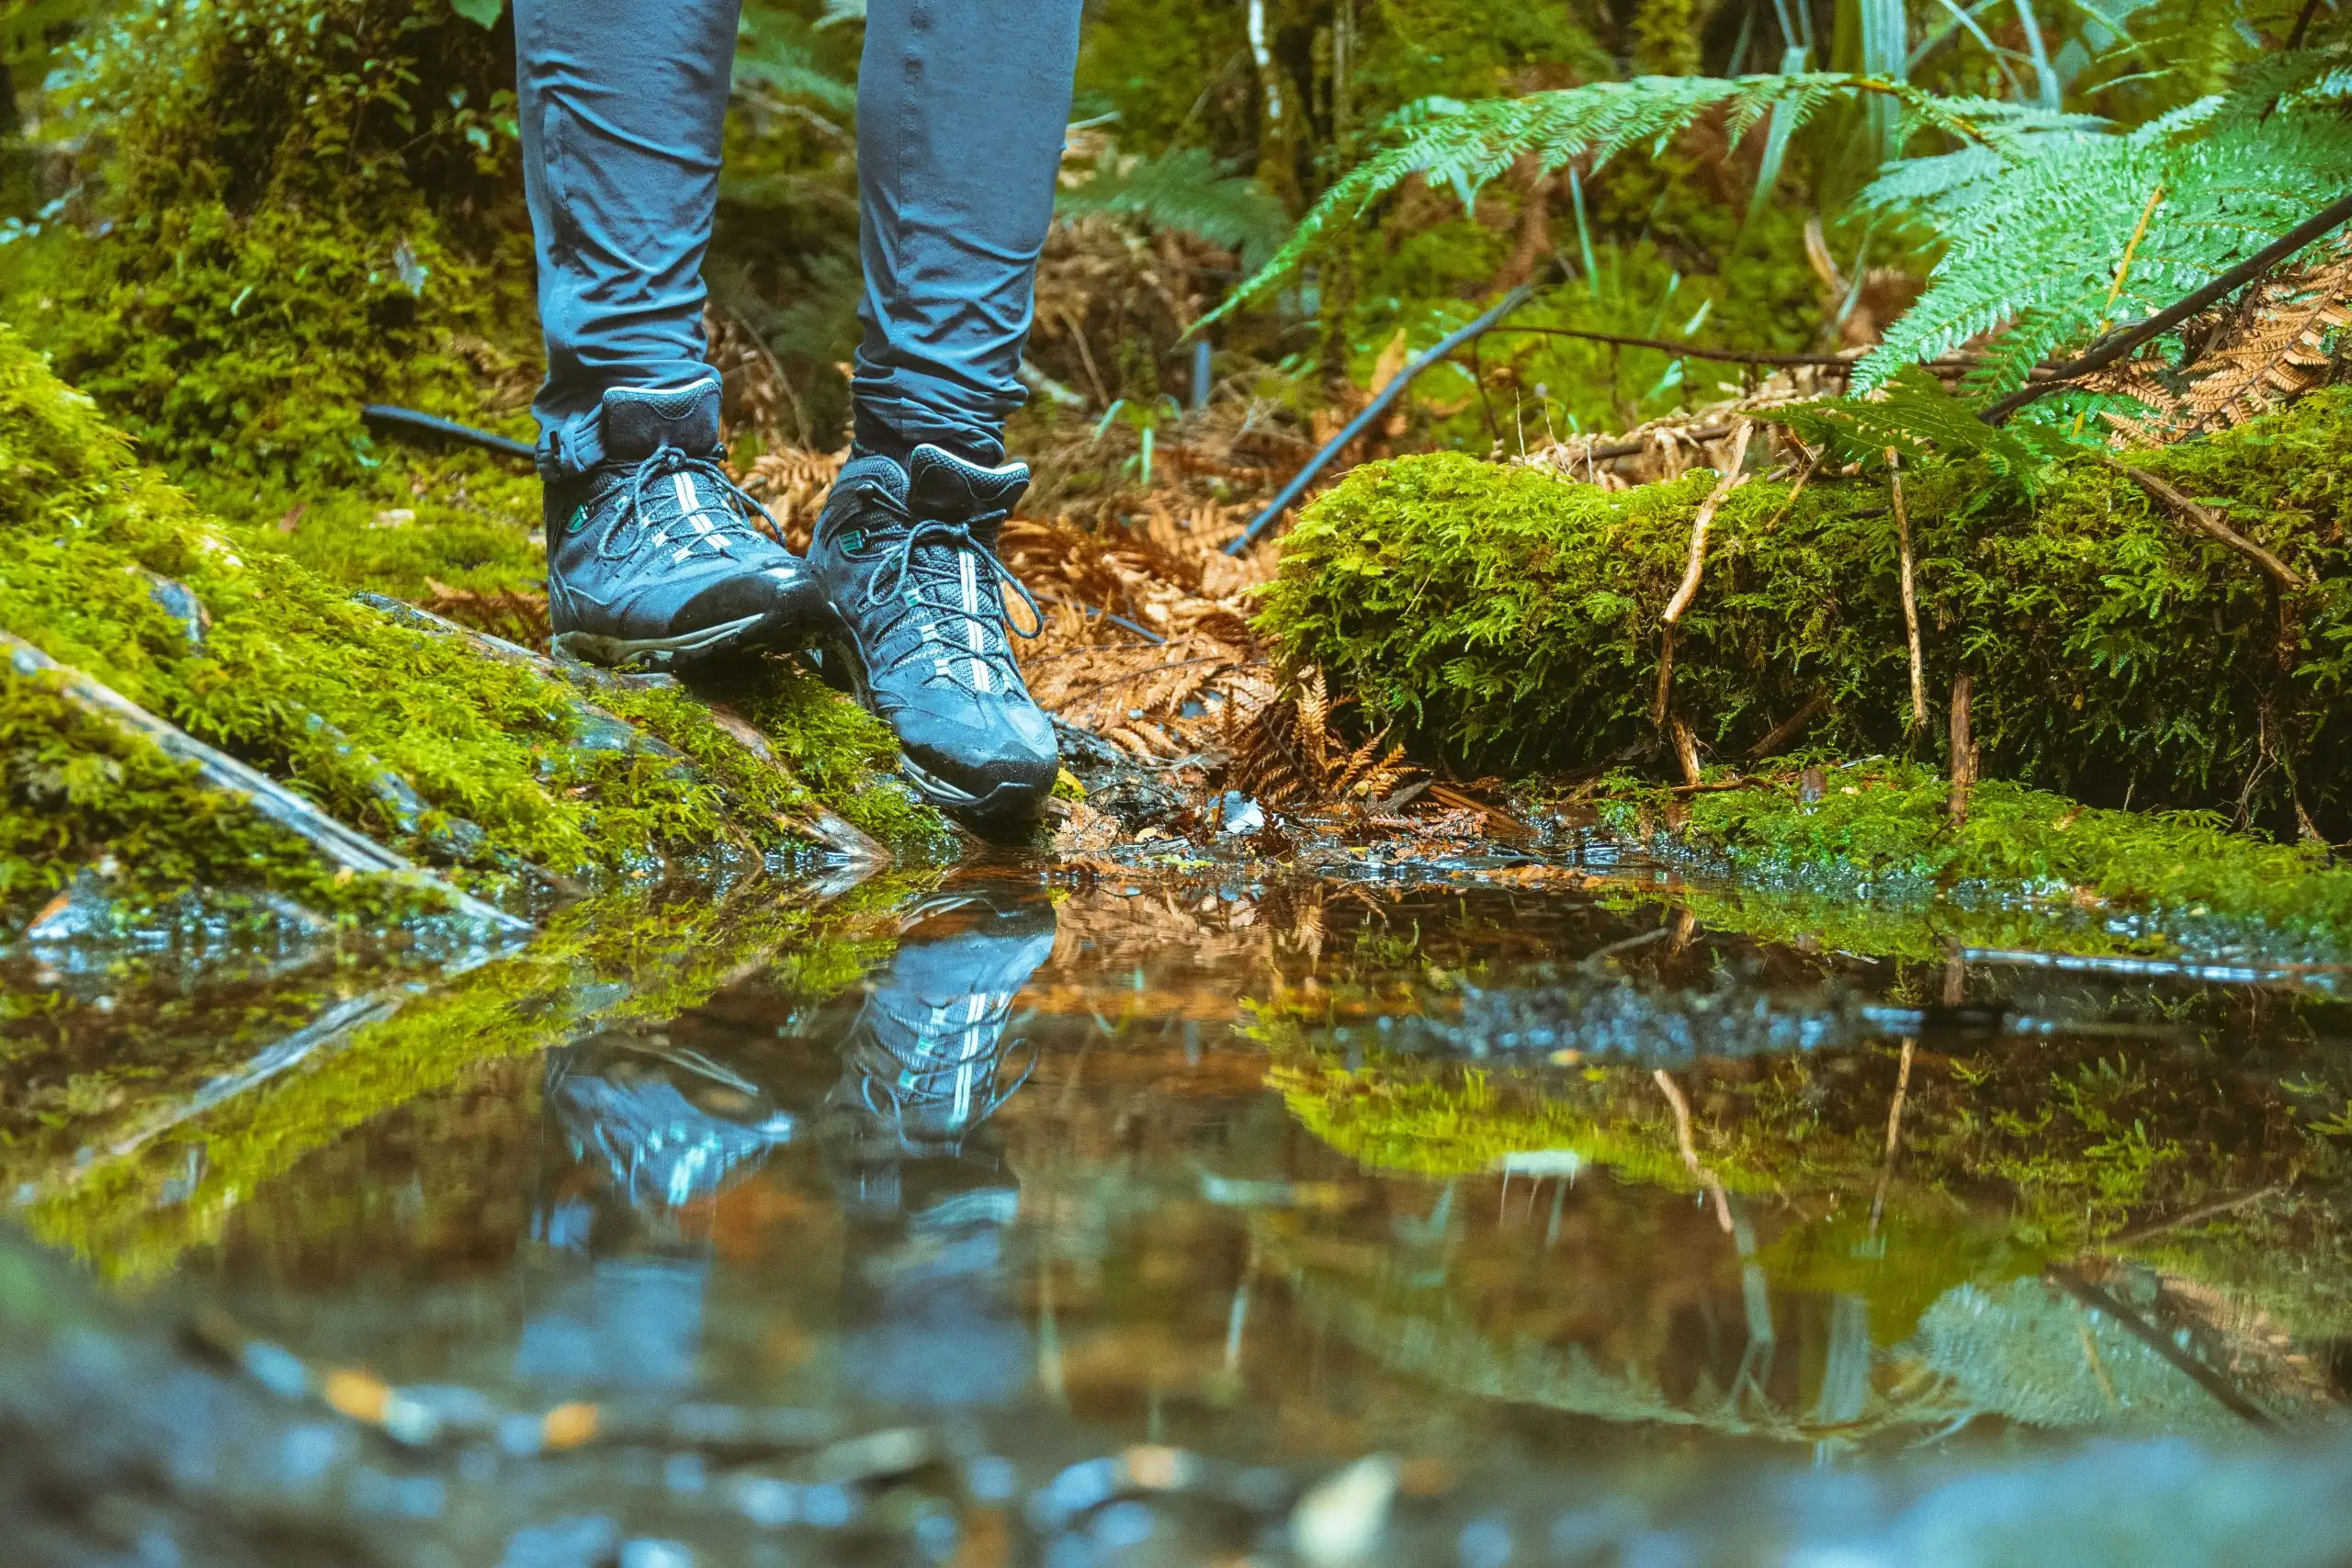 Top 9 rated water hiking shoes